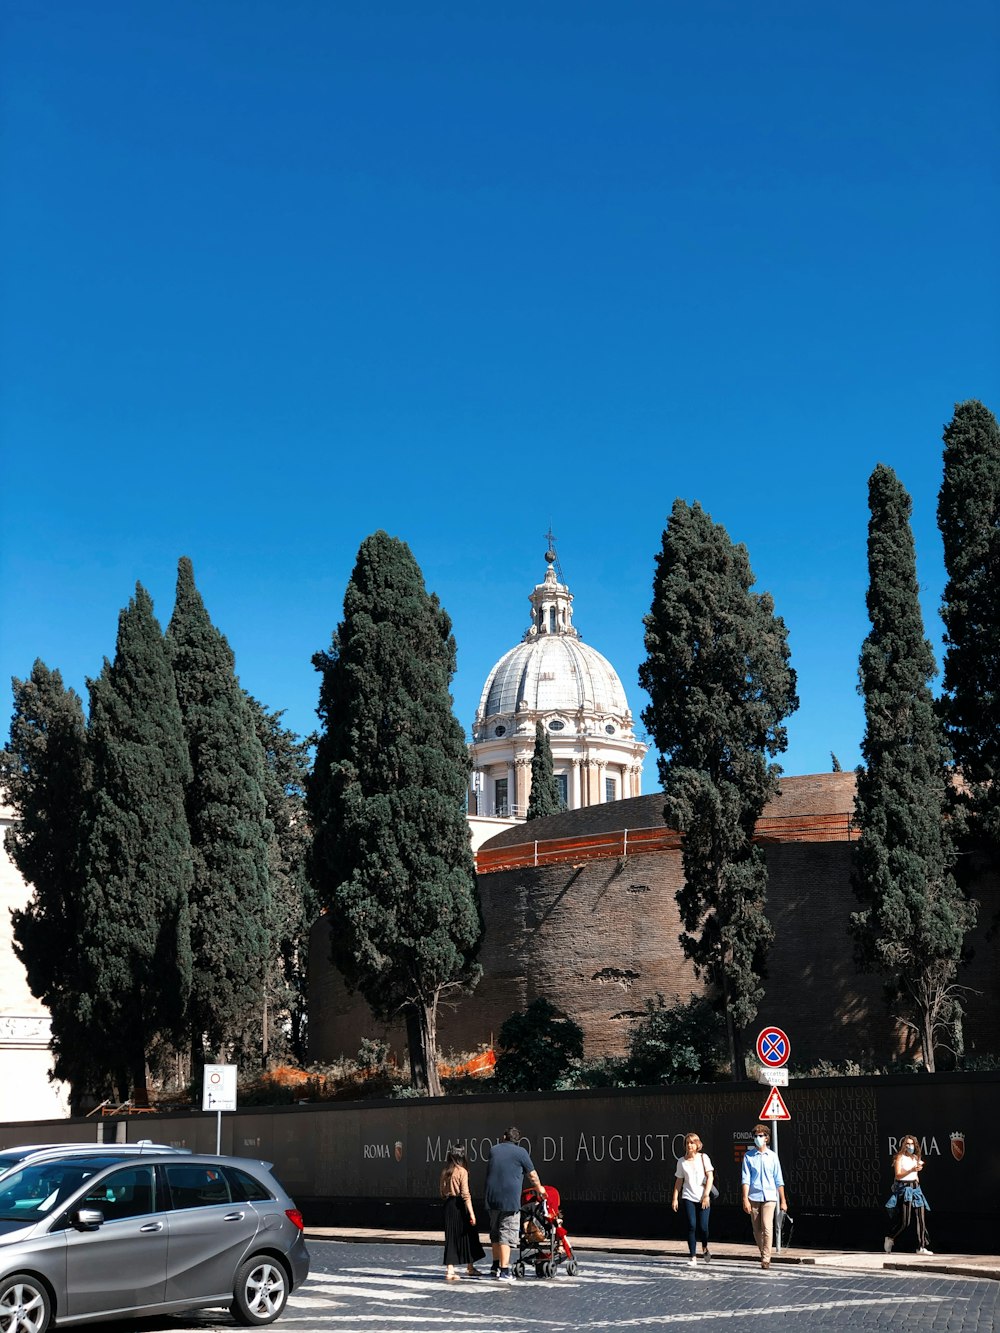 white and brown dome building near green trees under blue sky during daytime